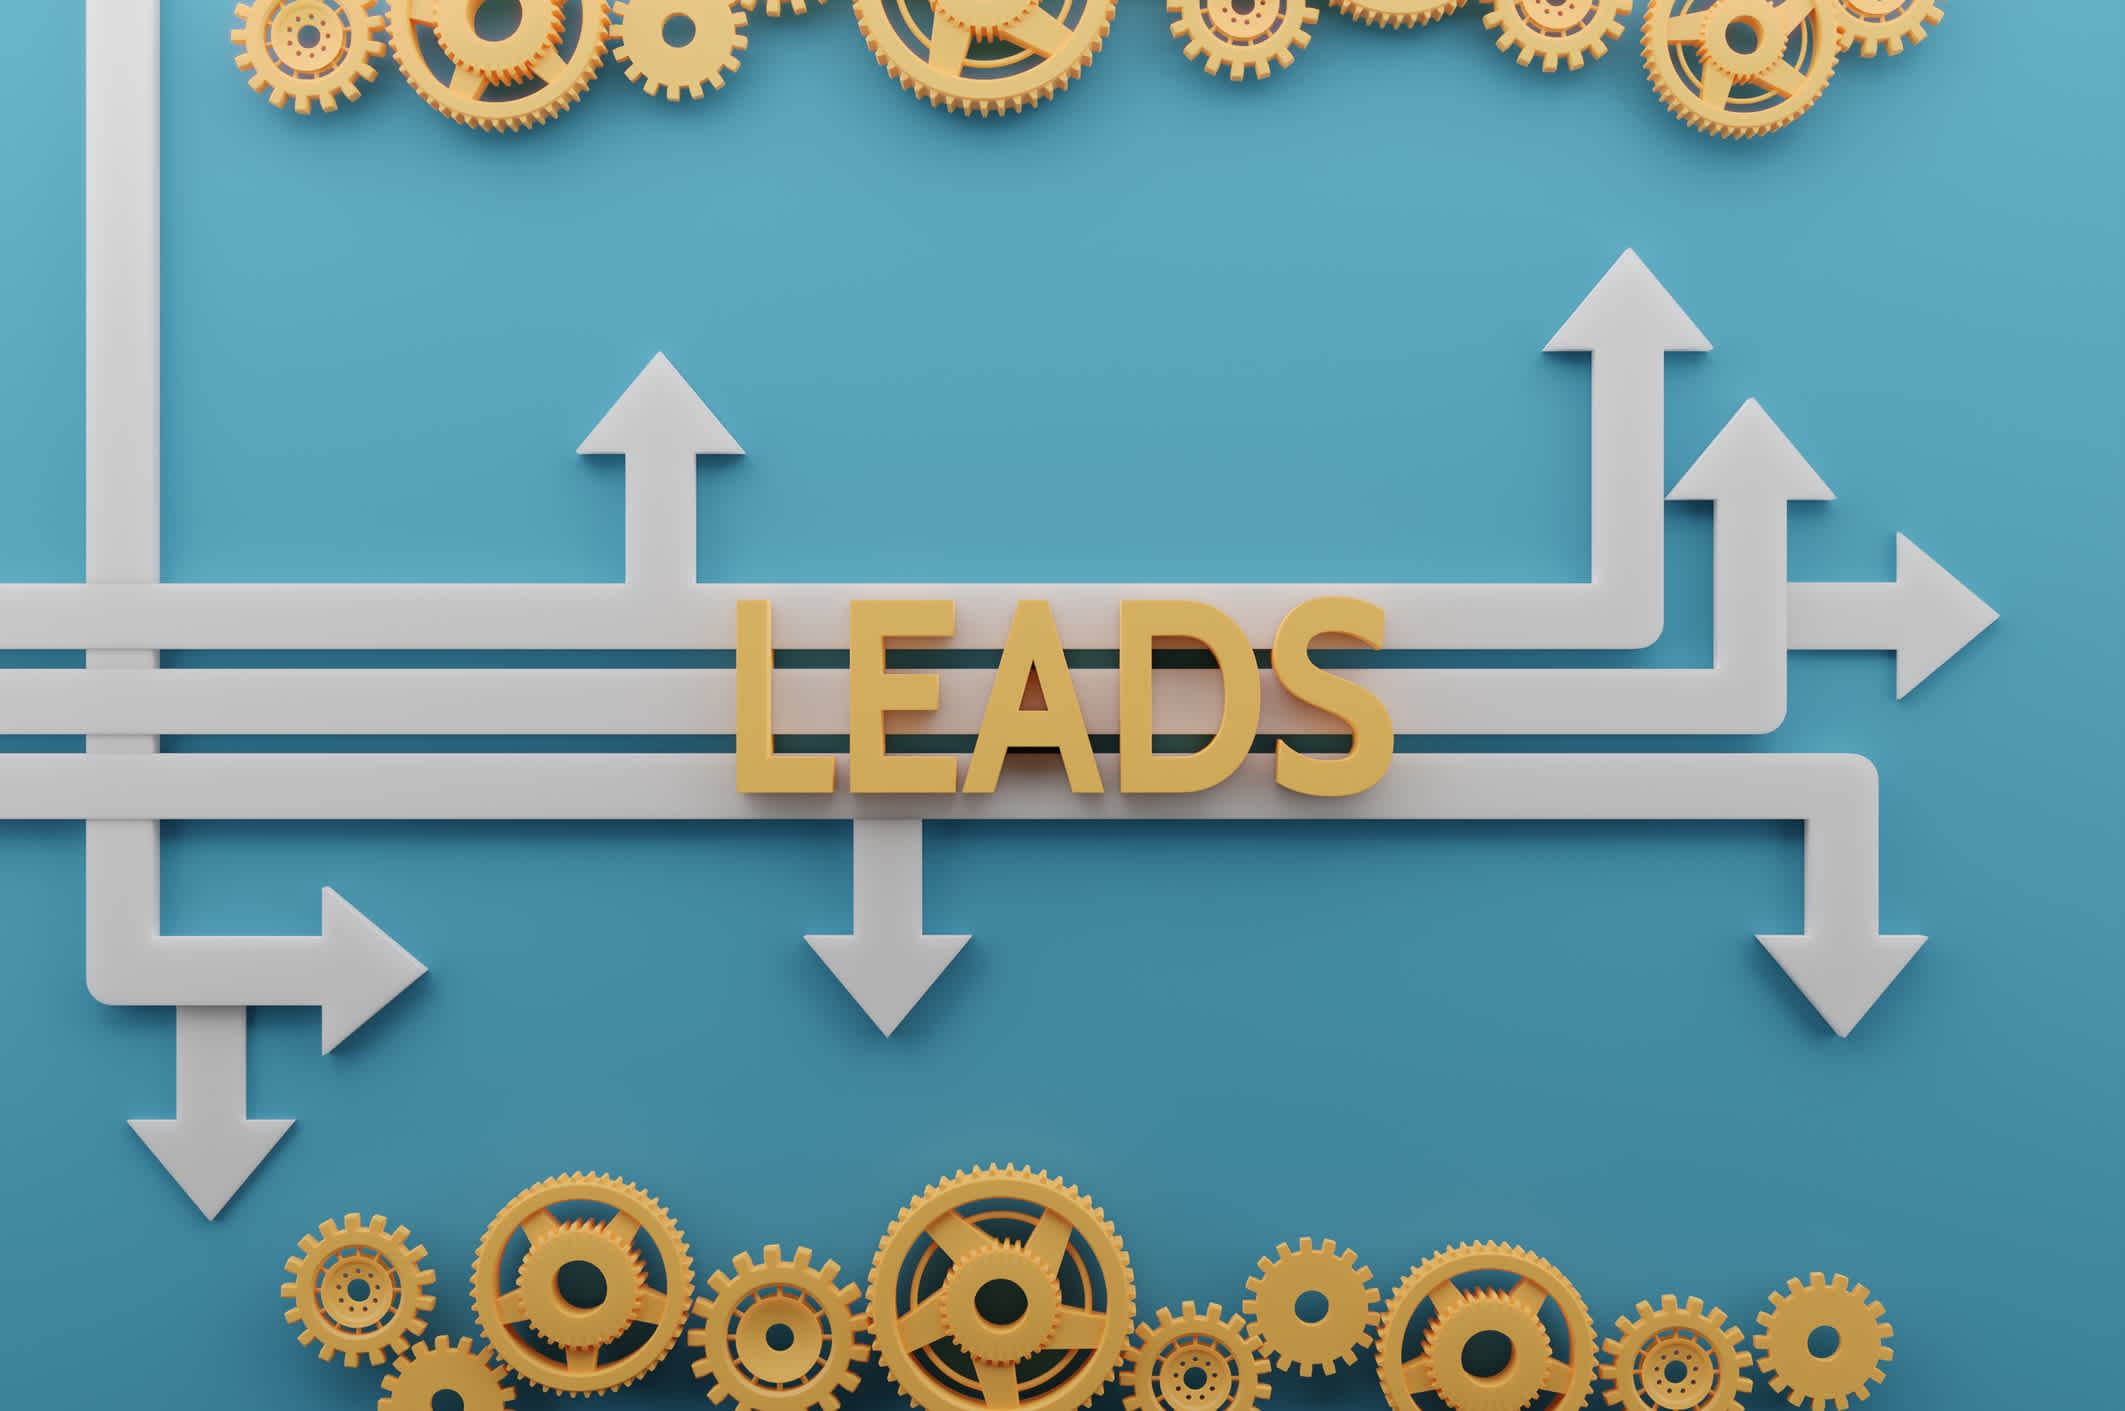 b2b sales leads all follow a different path graphic